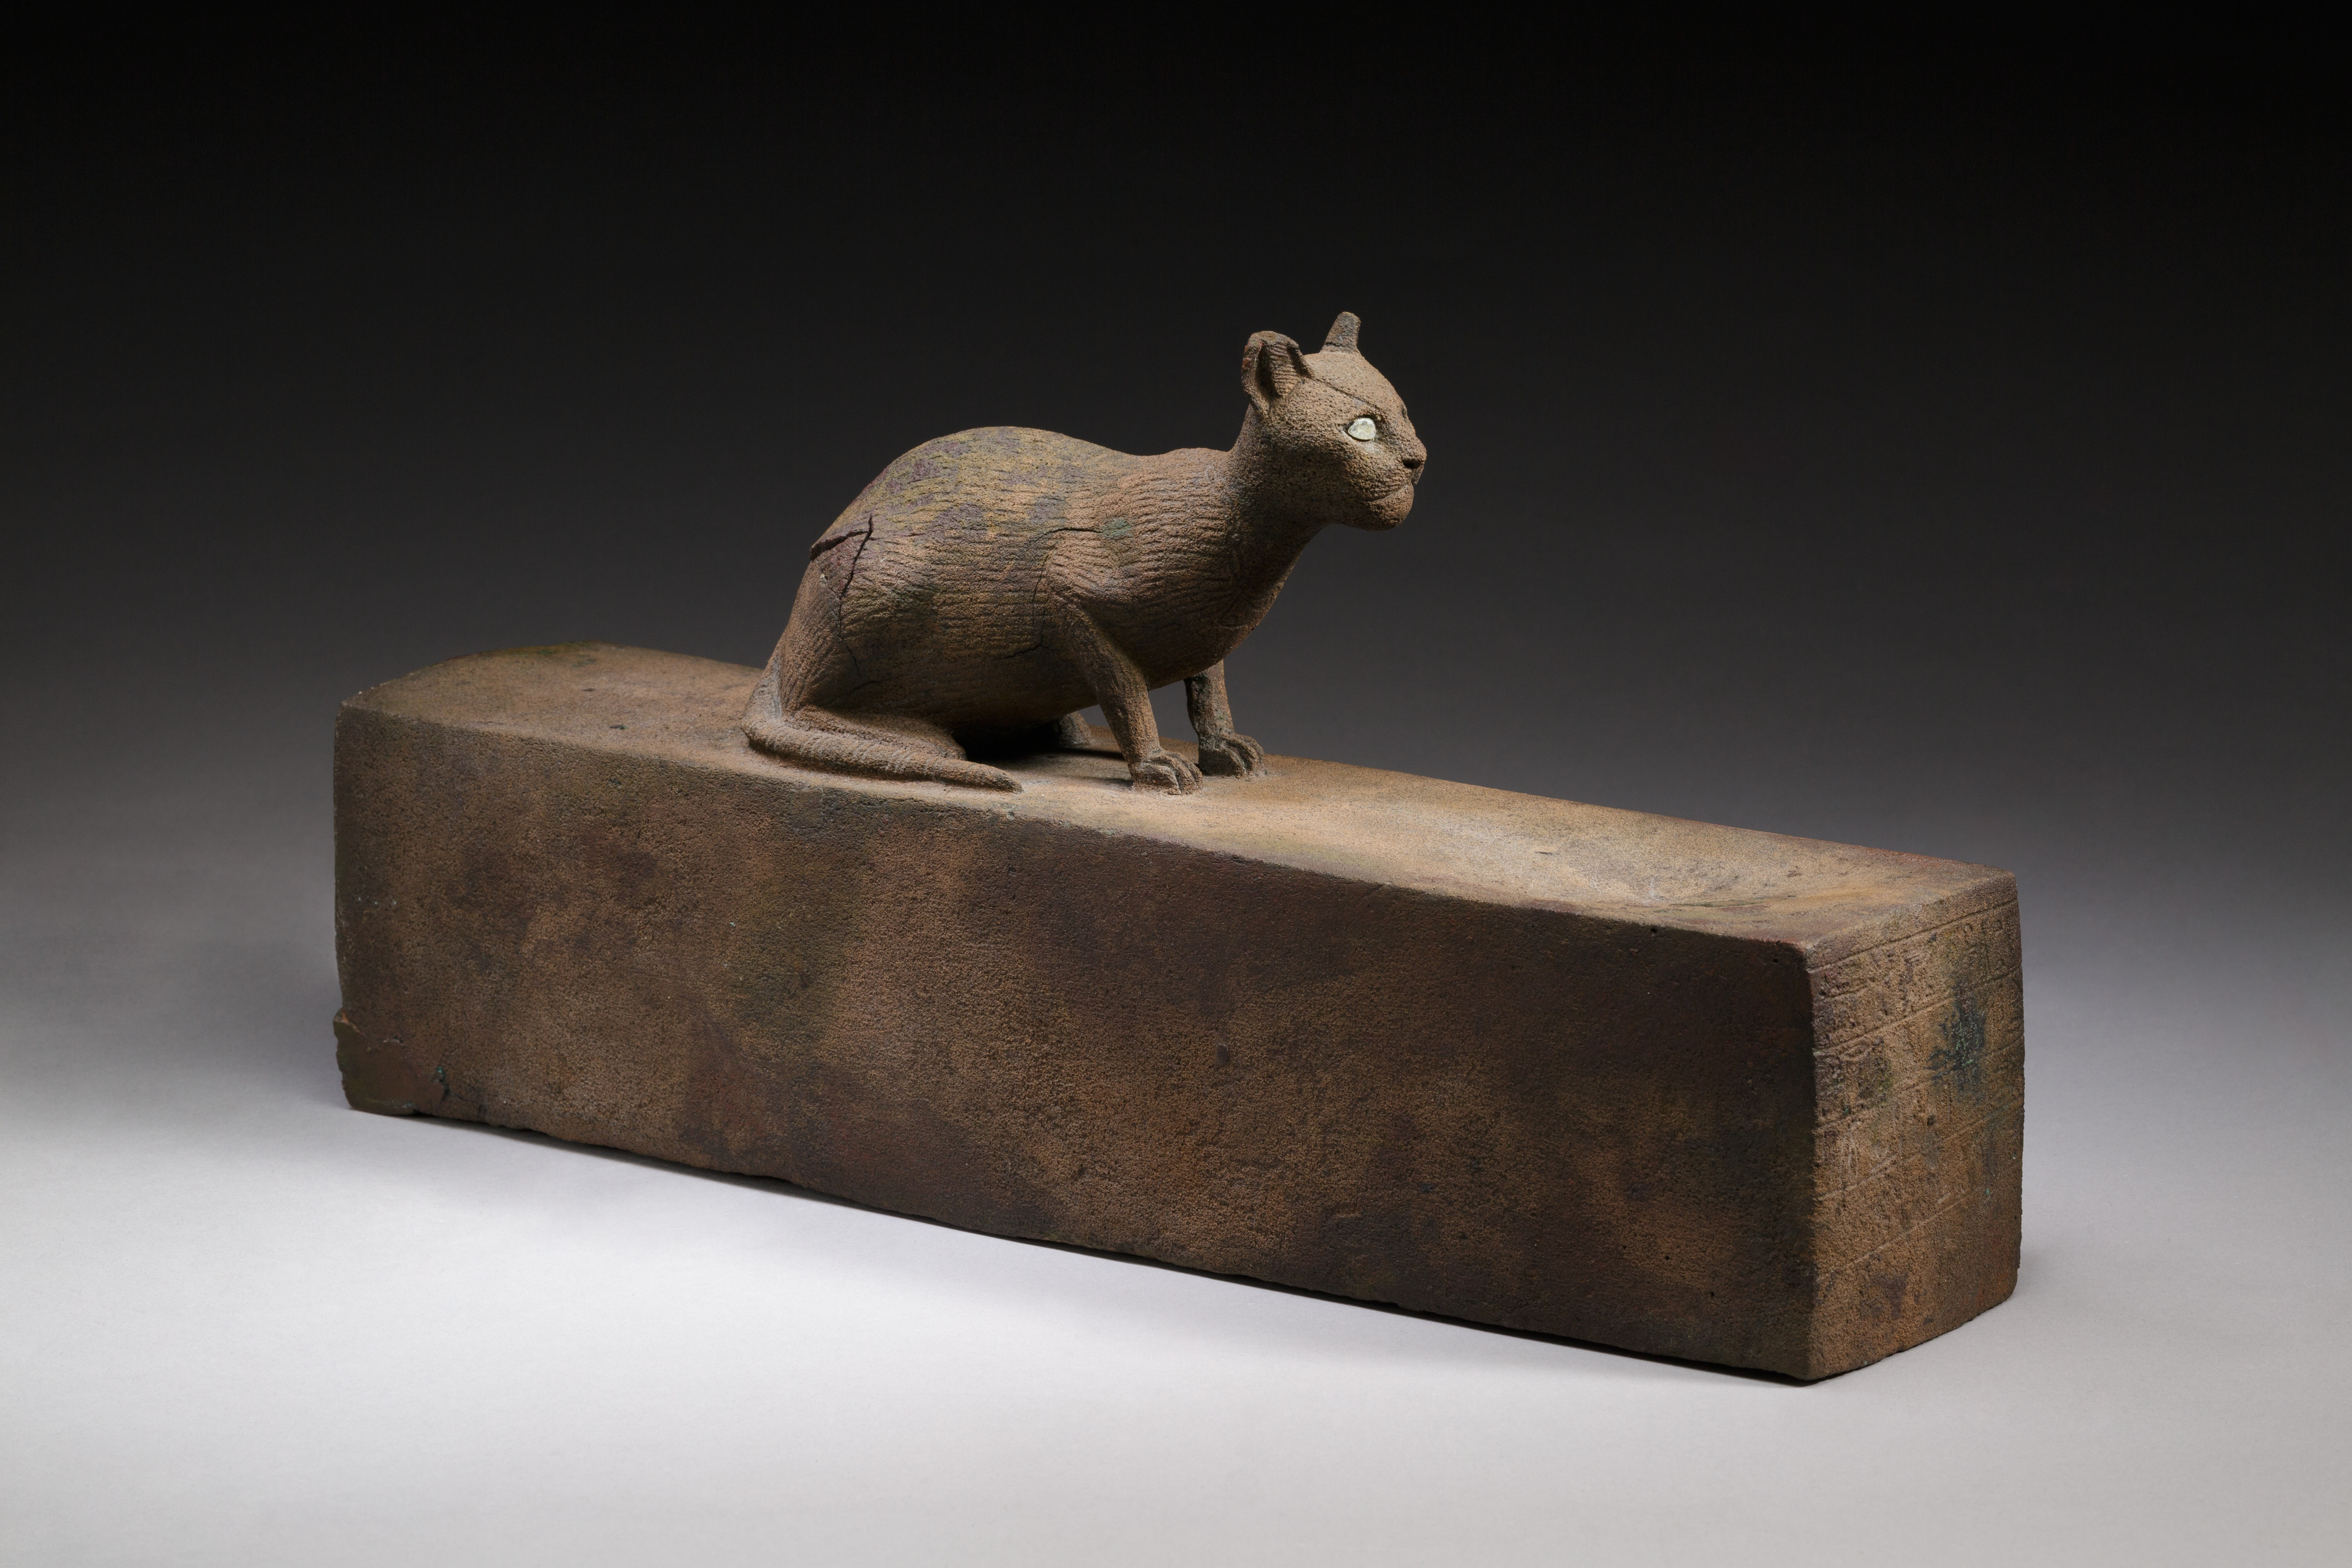 Cat Statuette intended to contain a mummified cat